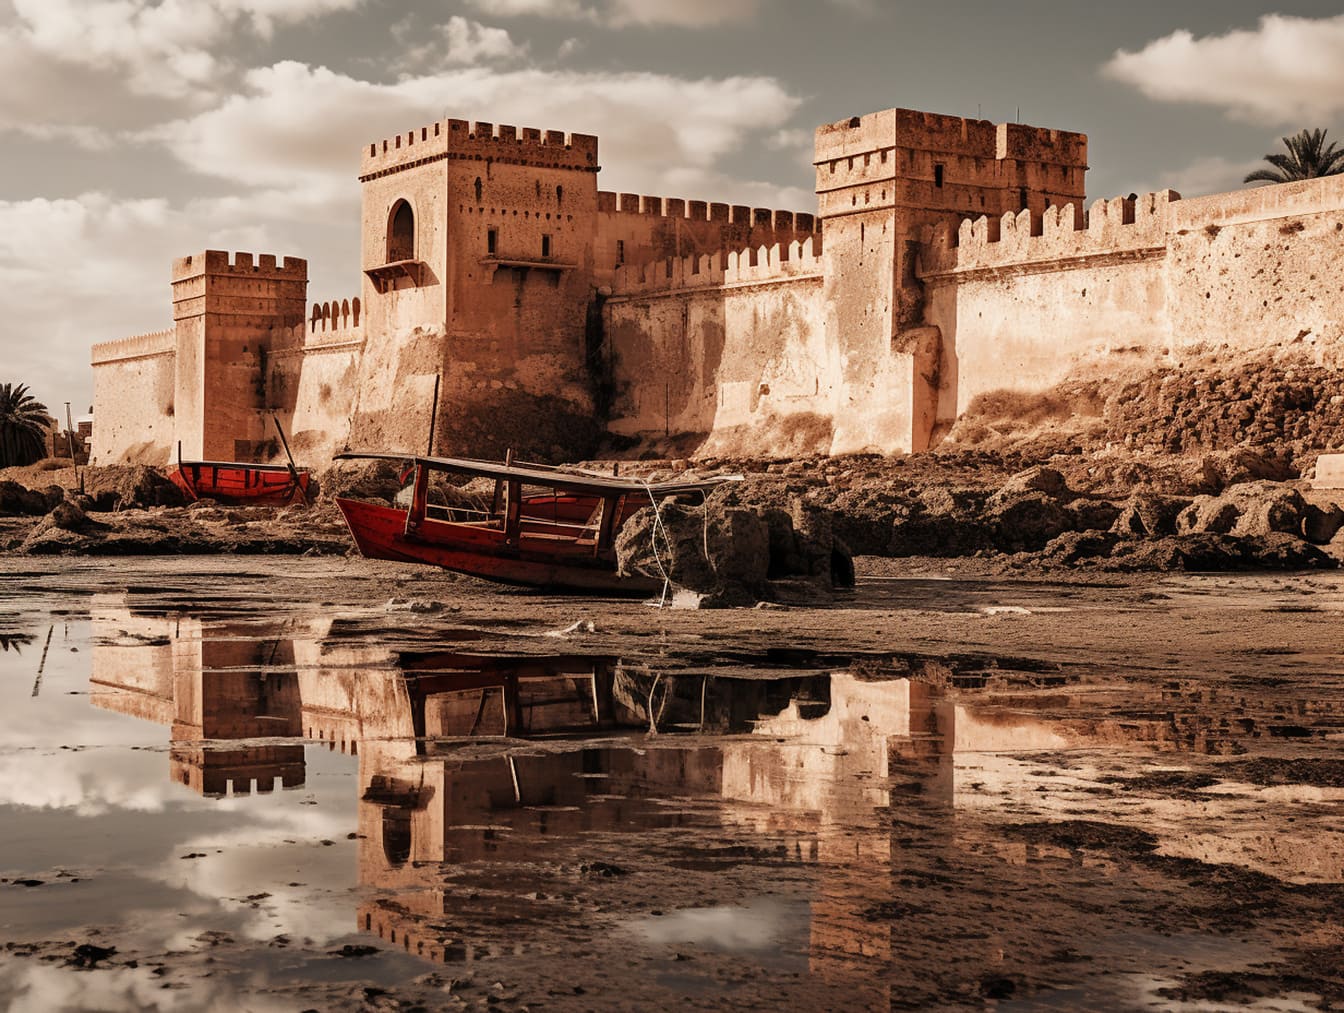 Medieval castle with a big rampart and boat in the riverbed at drought season